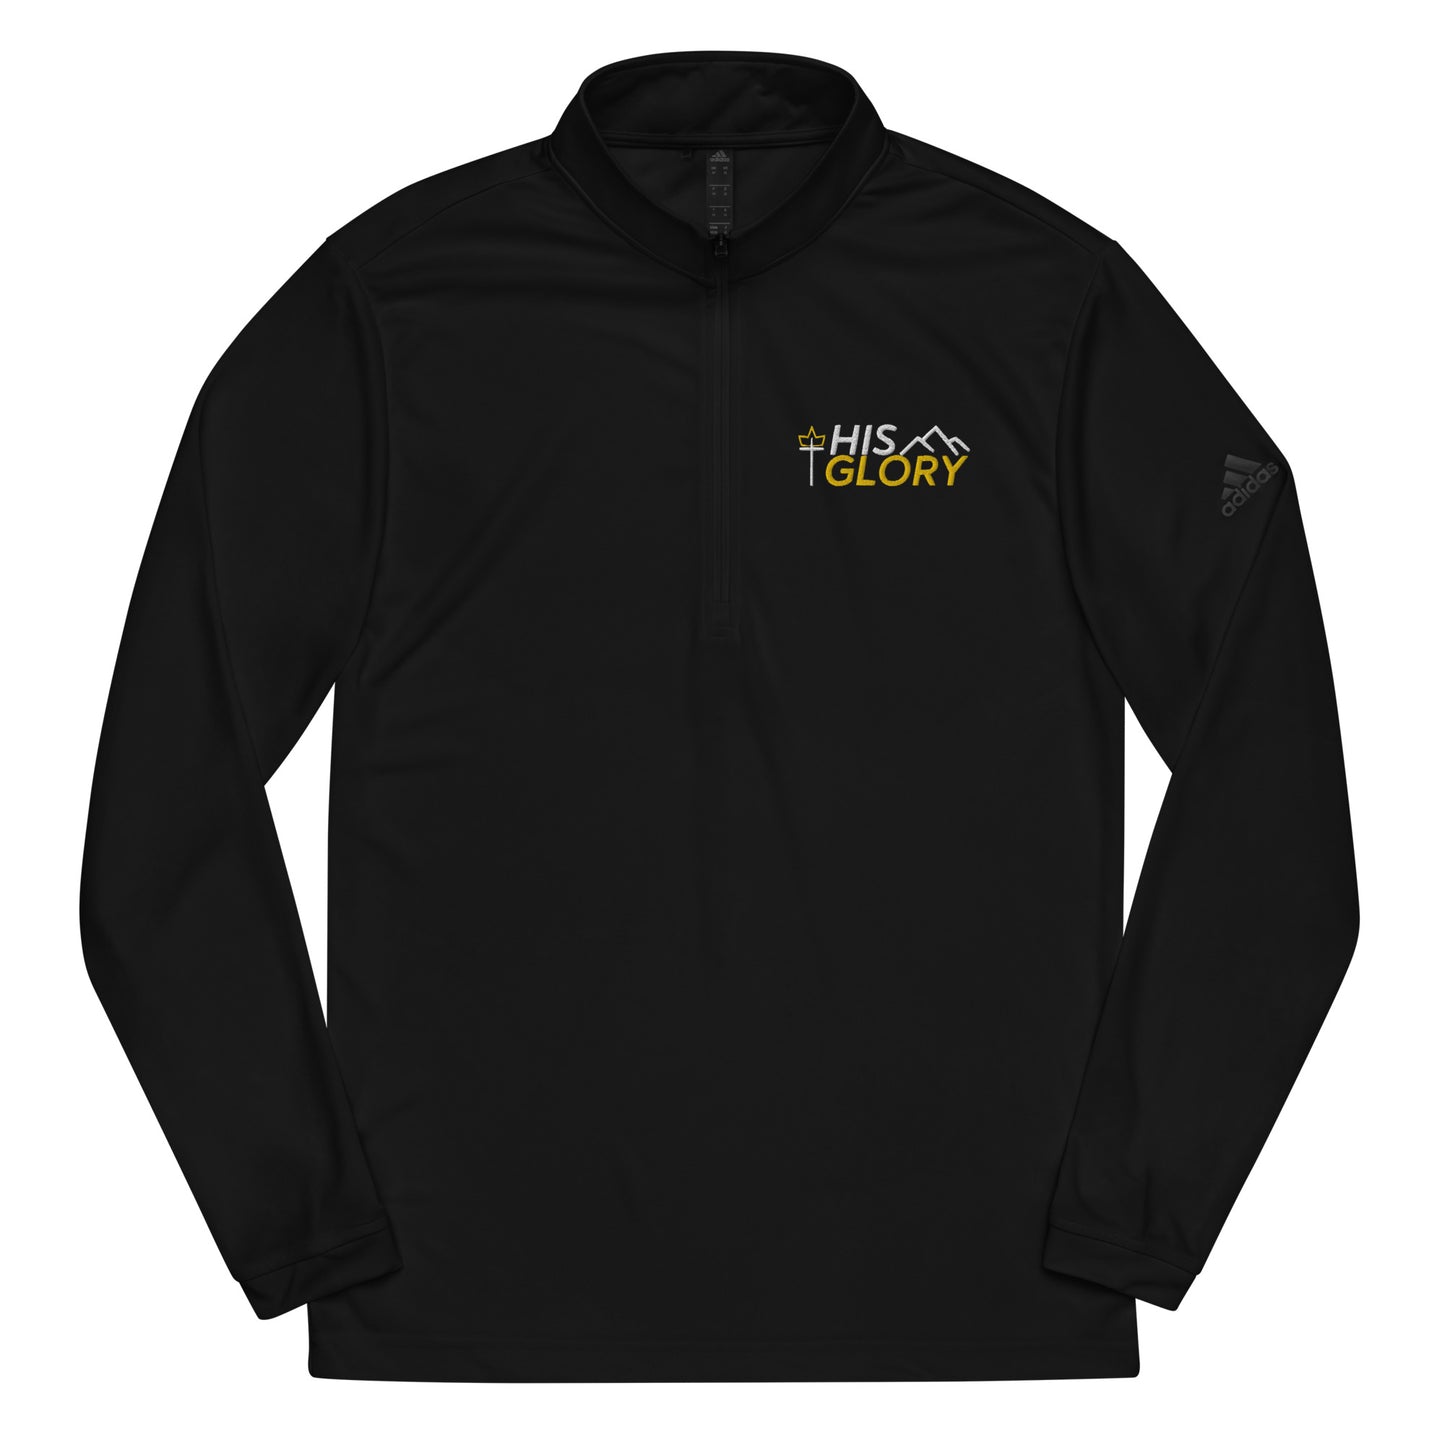 His Glory 3.0 - NEW - Embroidery - Quarter zip pullover